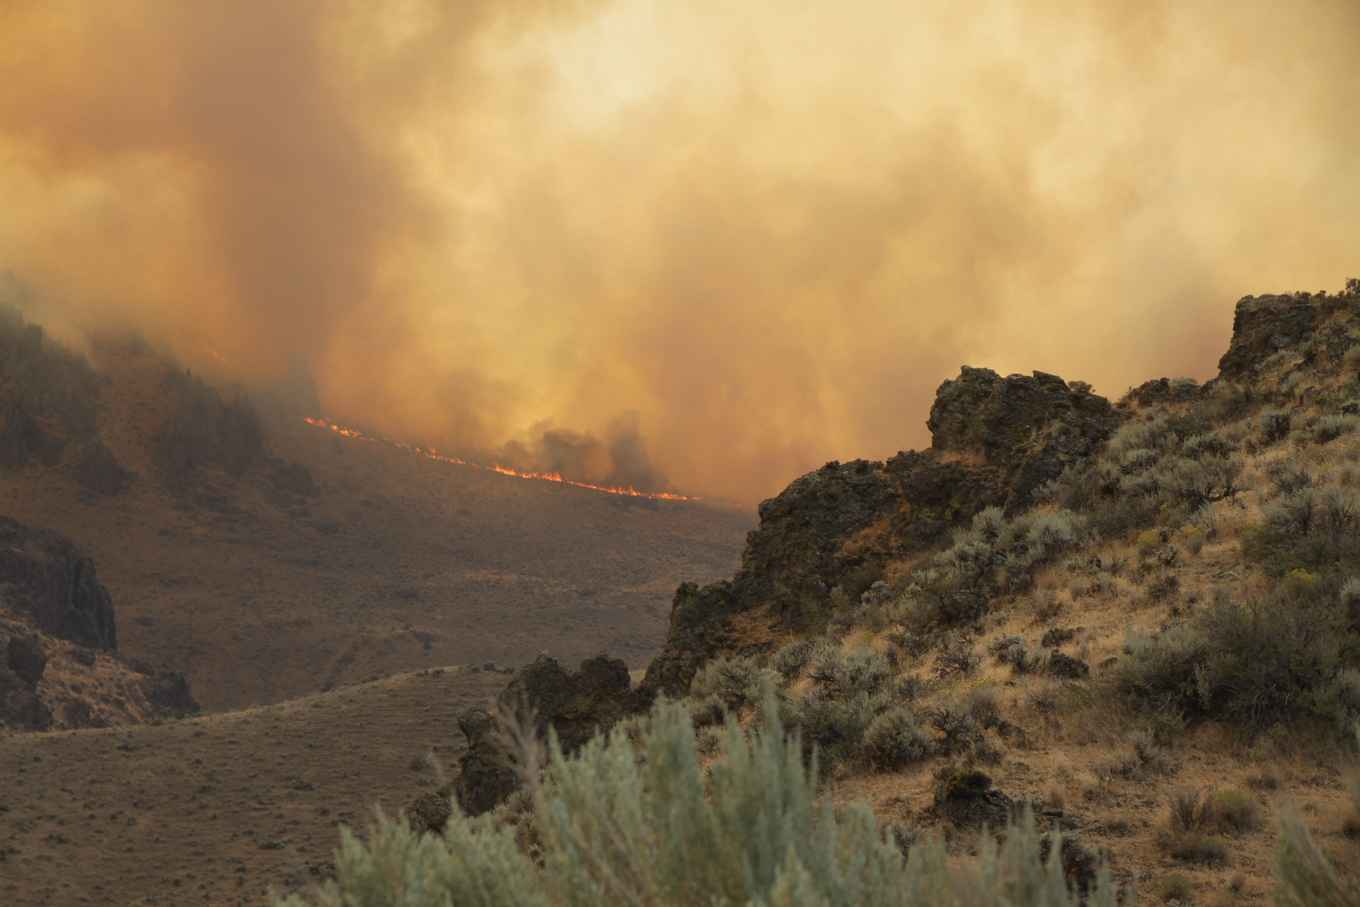 In 2015, a fire burned nearly 200,000 acres of sage-grouse habitat